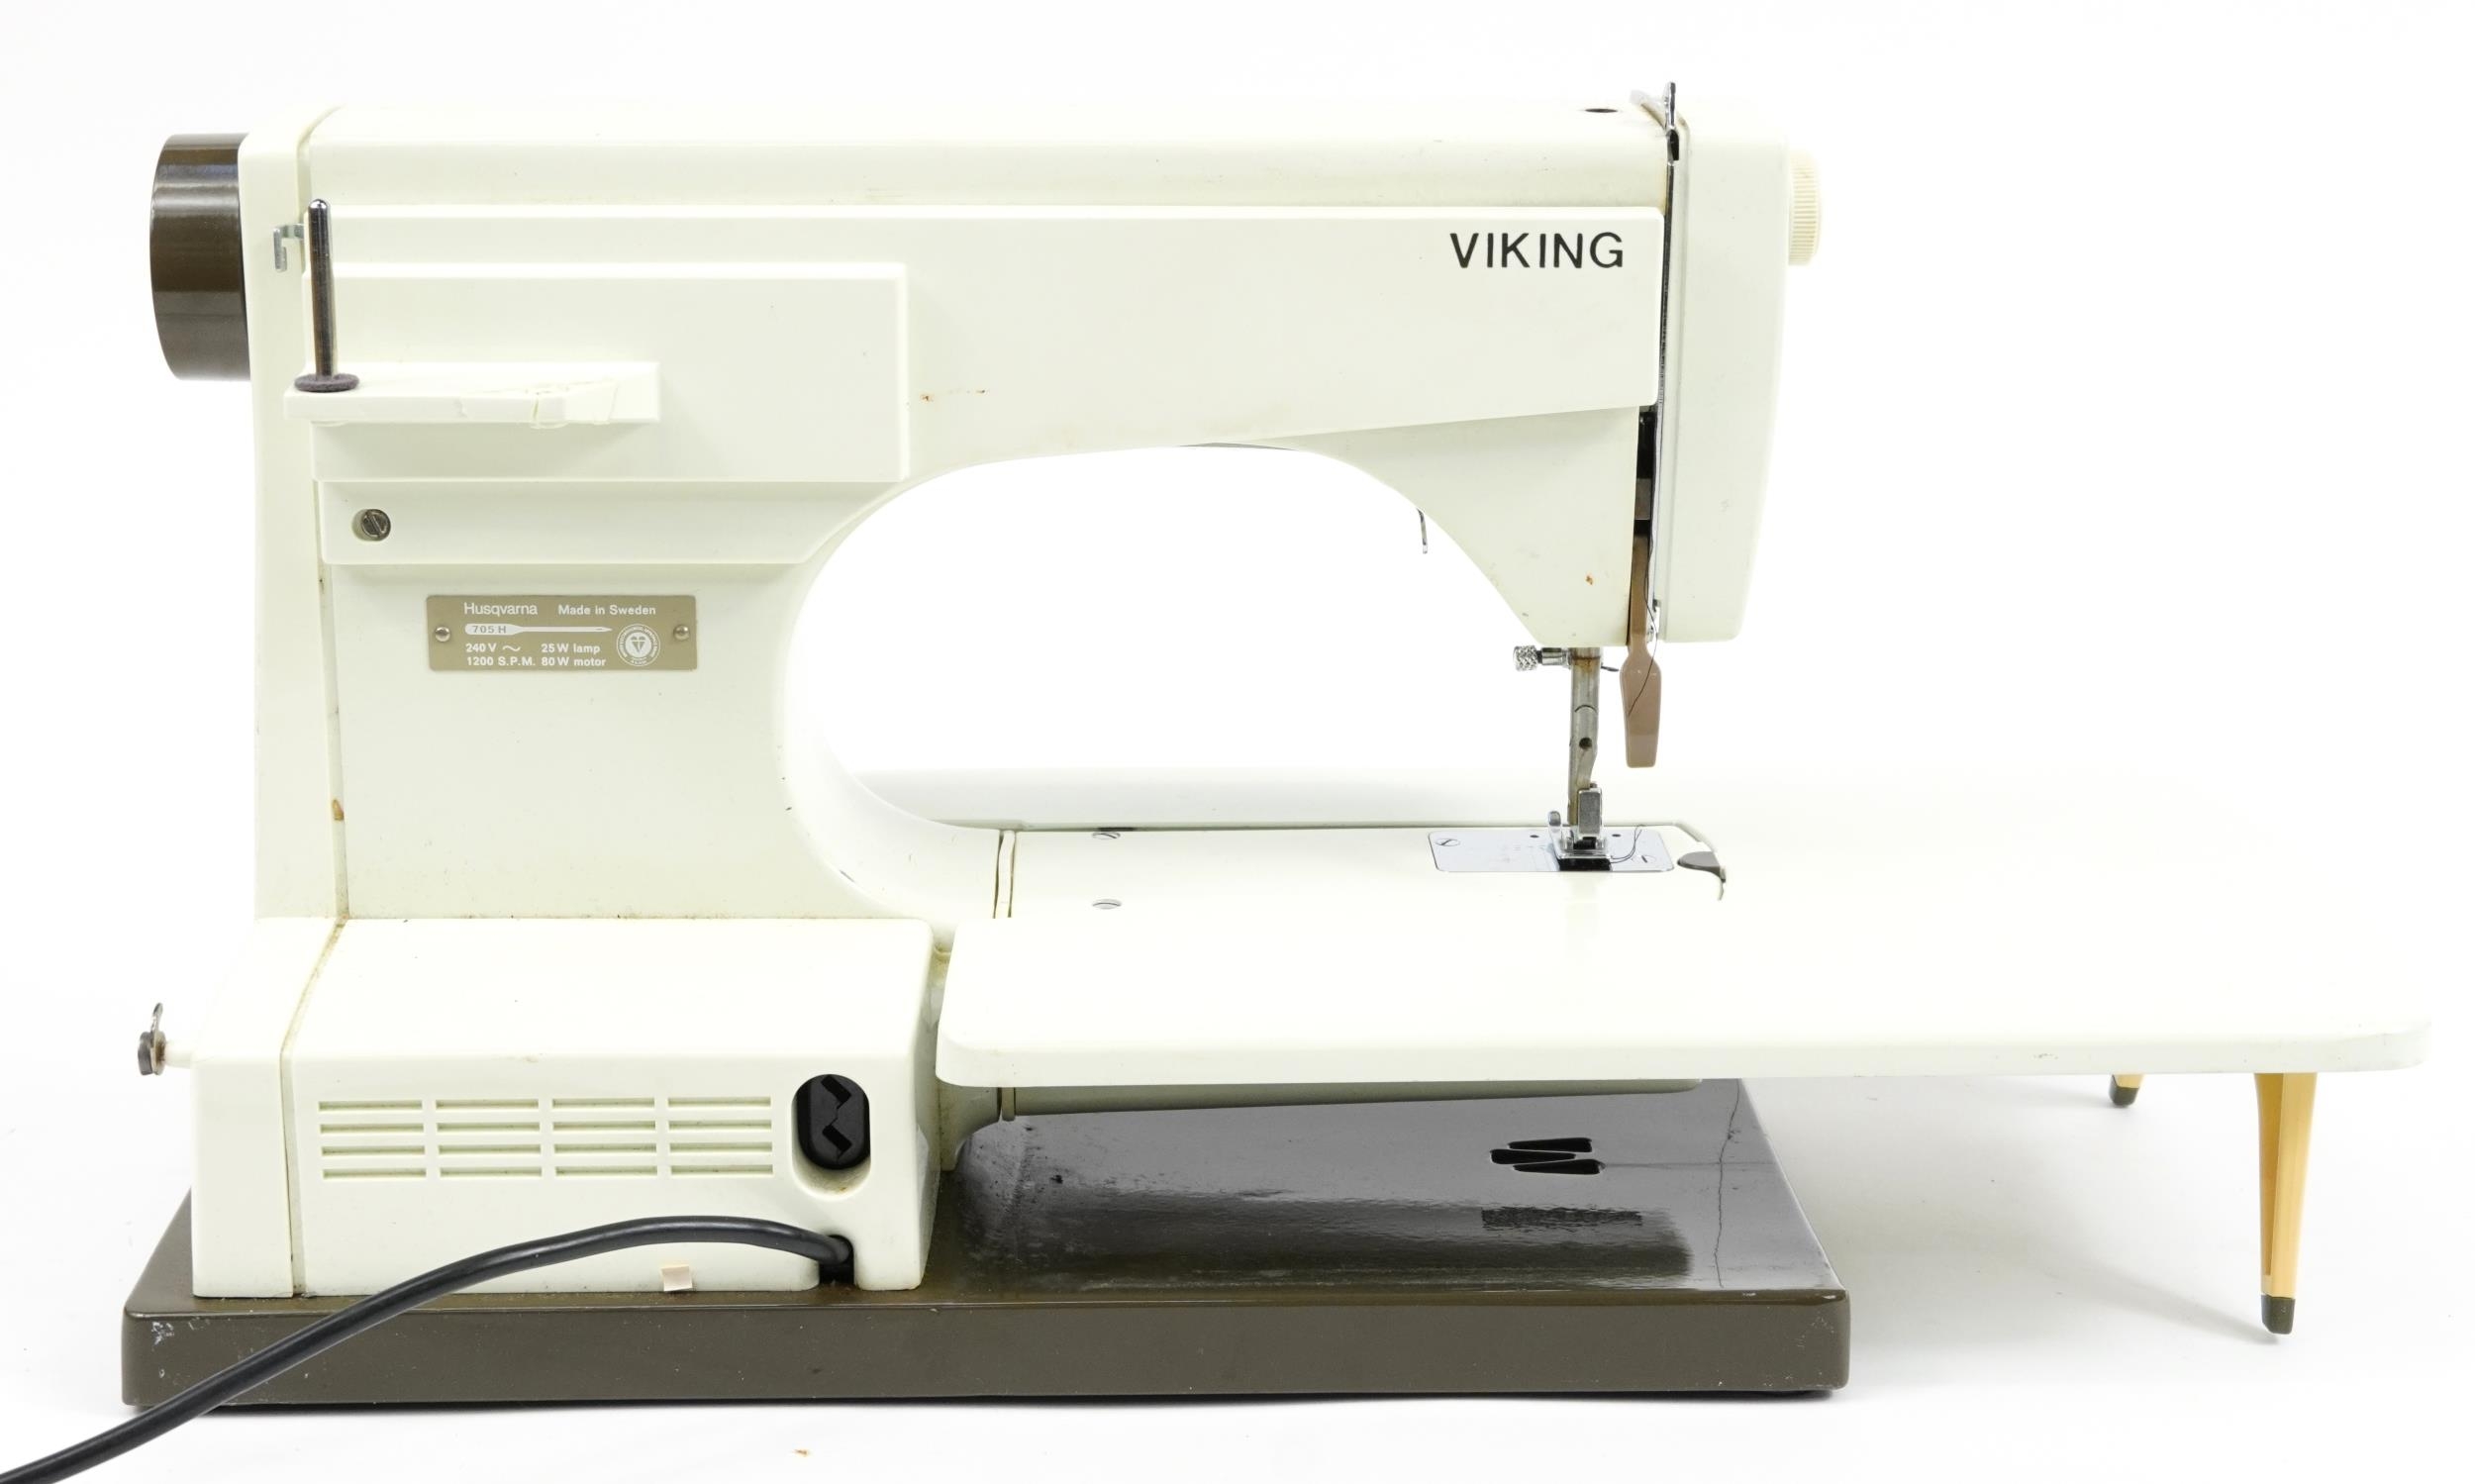 Husqvarna Viking electric sewing machine with case, model 5530 - Image 5 of 5